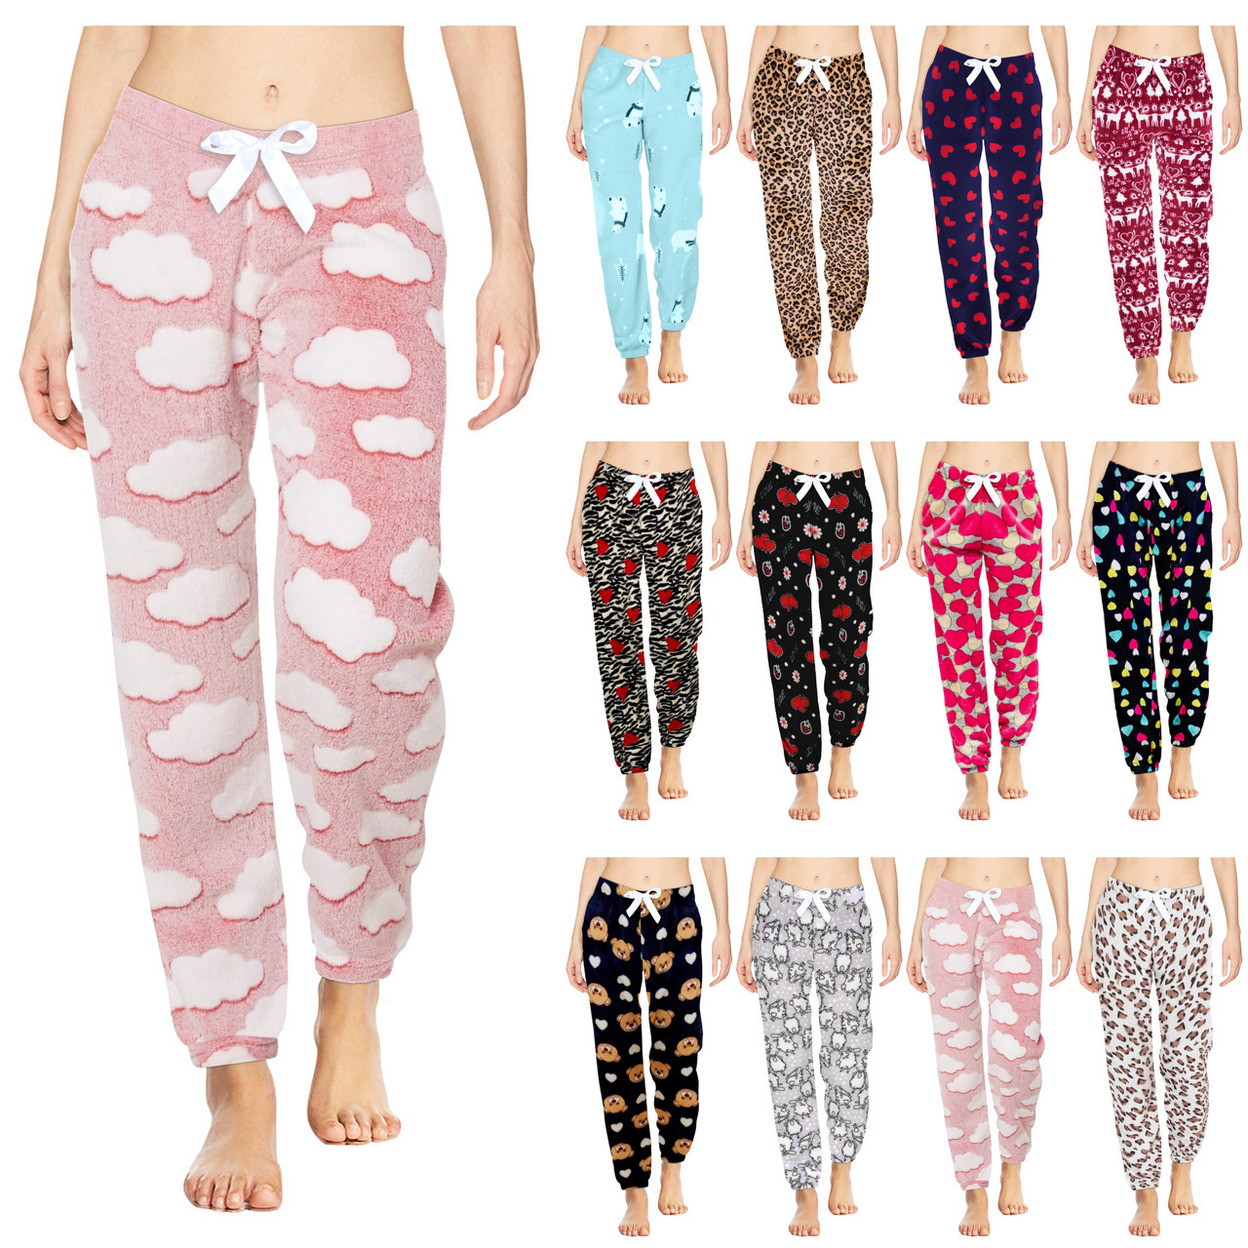 Multi-Pack: Women's Printed Ultra-Soft Comfy Stretch Micro-Fleece Pajama Lounge Pants - 1-pack, Shapes, Large